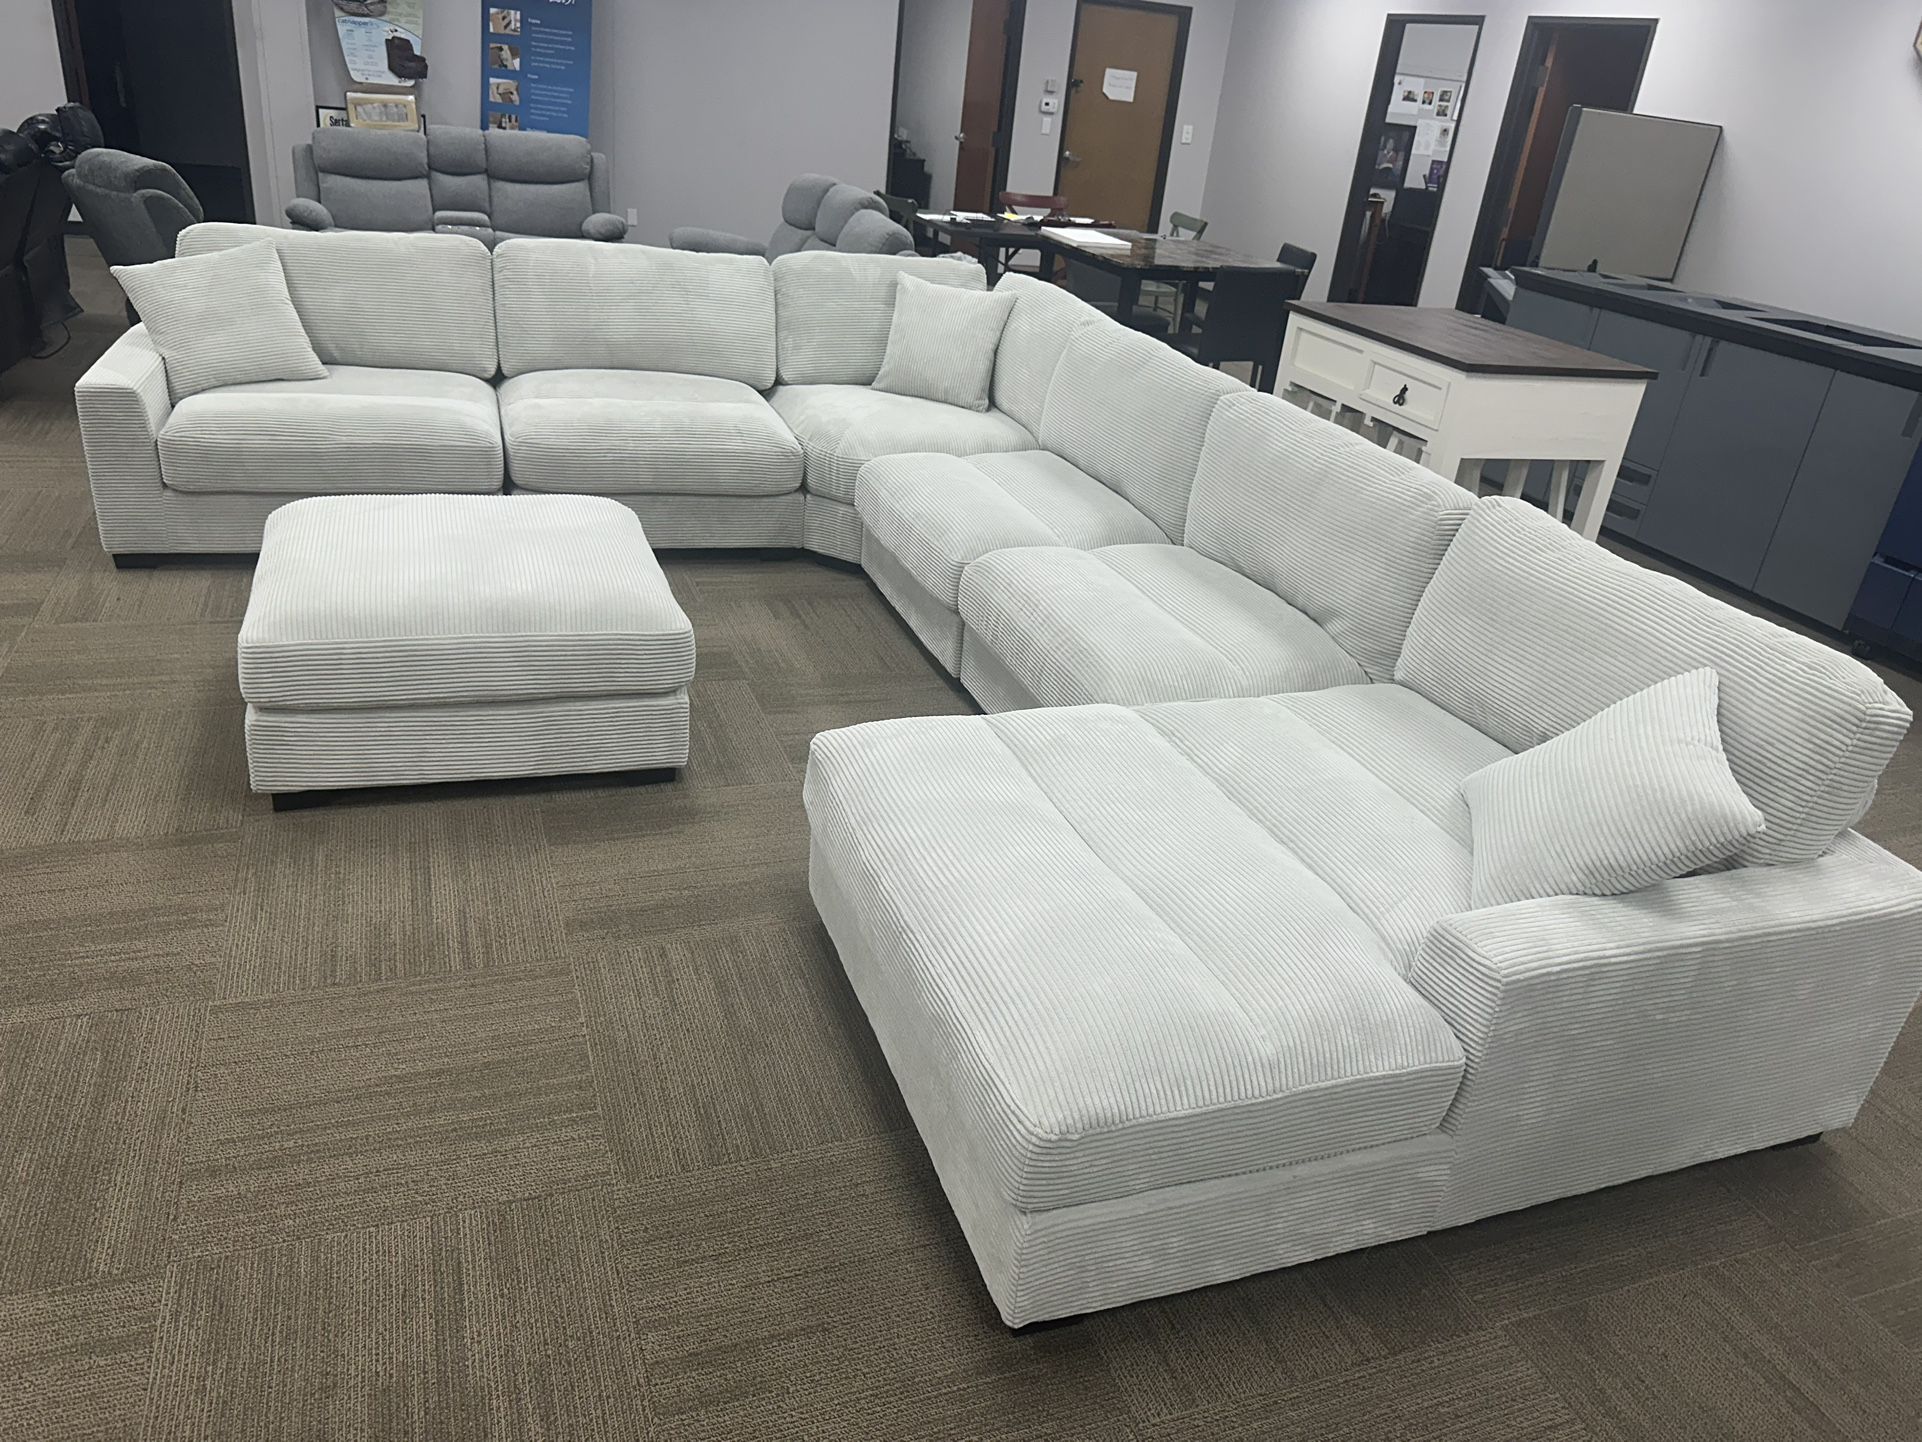 🔥Brand New Oversized Sectional Sofa🔥